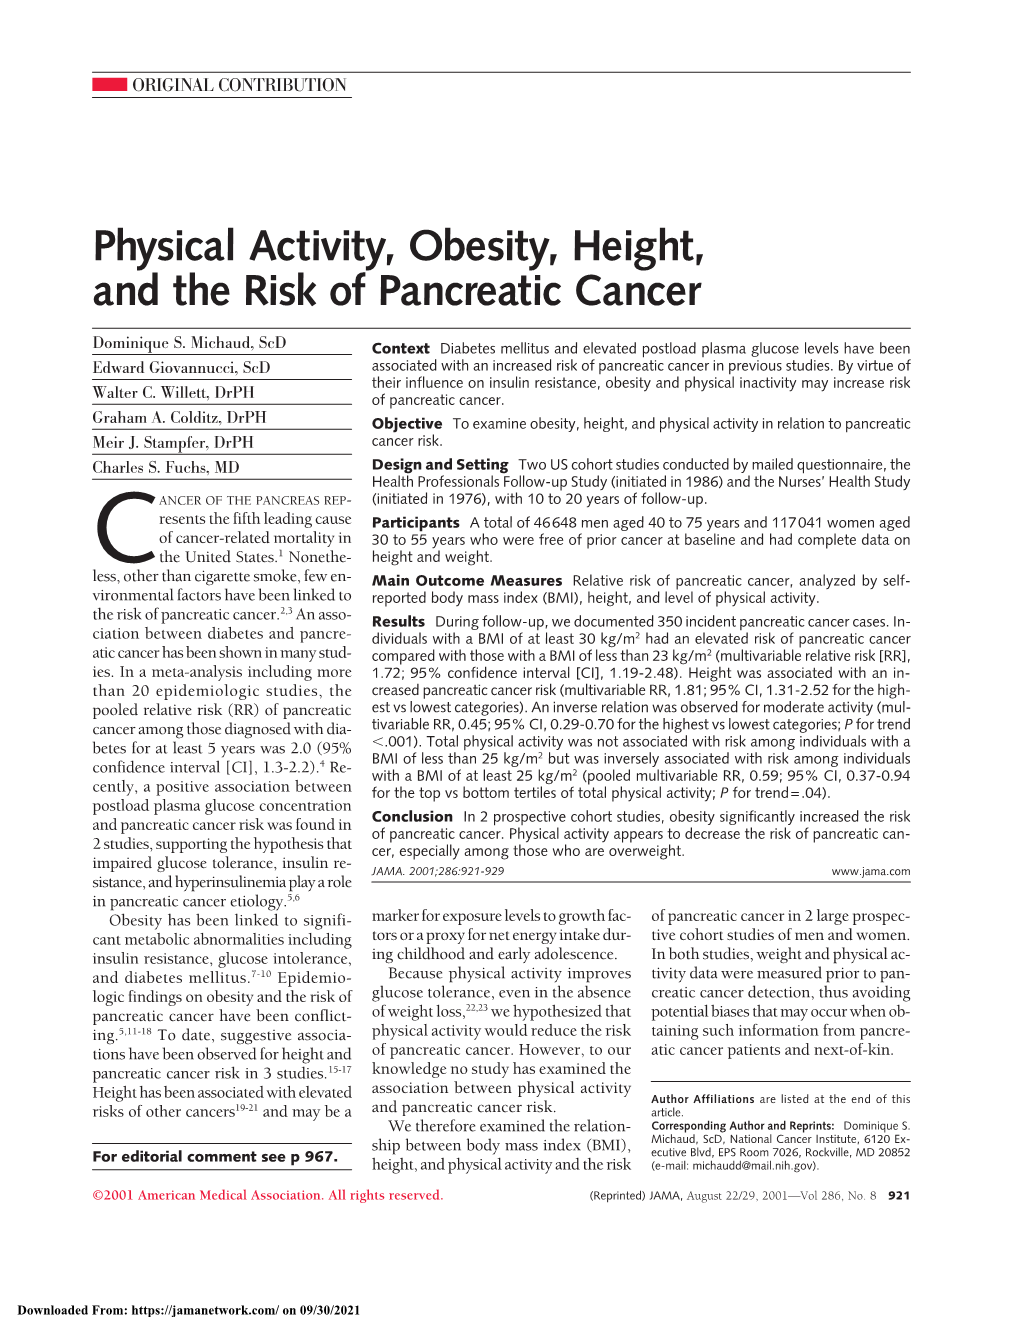 Physical Activity, Obesity, Height, and the Risk of Pancreatic Cancer